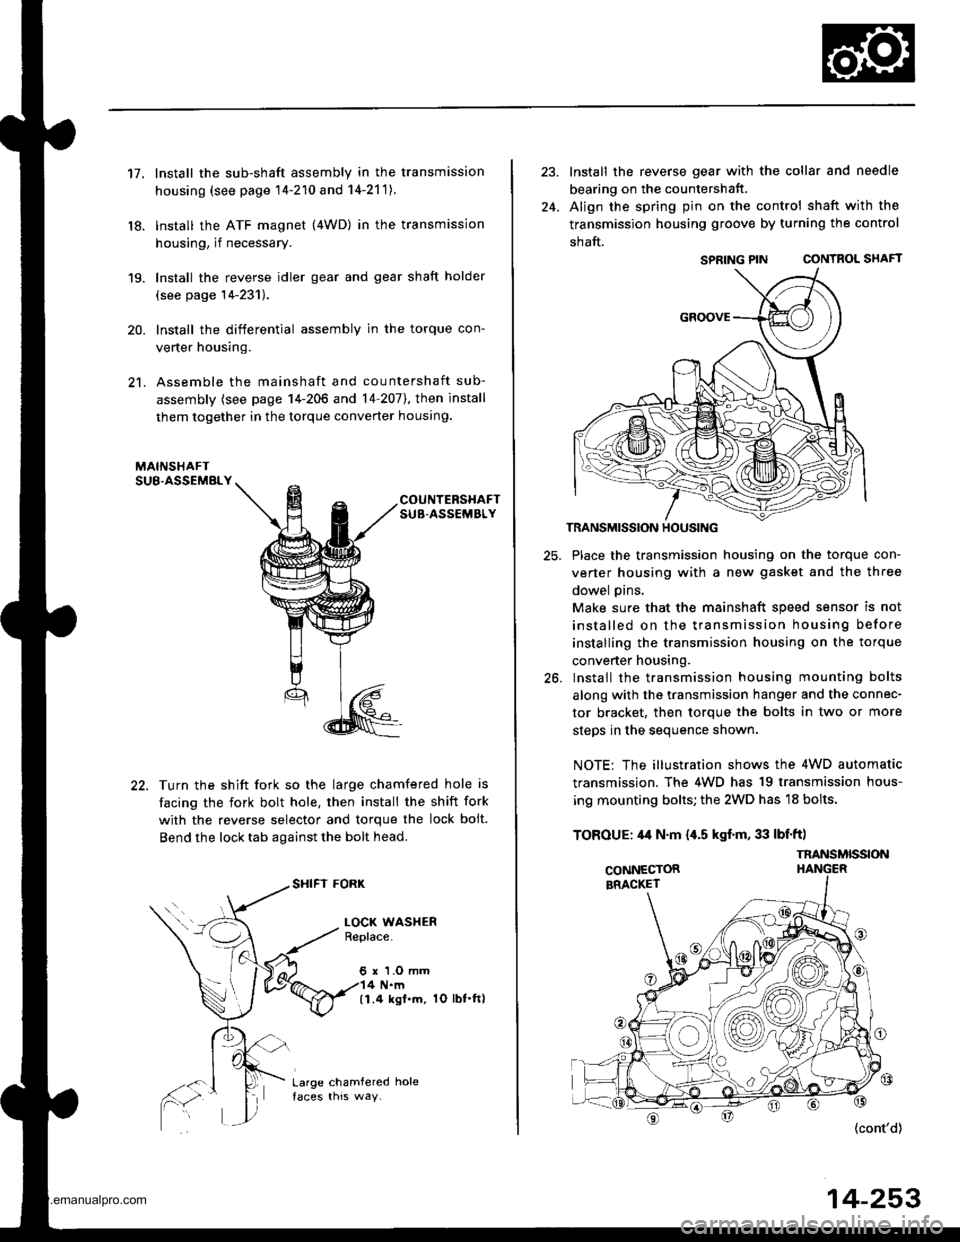 HONDA CR-V 1997 RD1-RD3 / 1.G Workshop Manual 
17.
18.
19.
20.
21.
Install the sub-shaft assembly in the transmission
housing (see page 14-210 and 14-2111.
lnstall the ATF magnet (4WD) in the transmission
housing, if necessary.
Install the rever